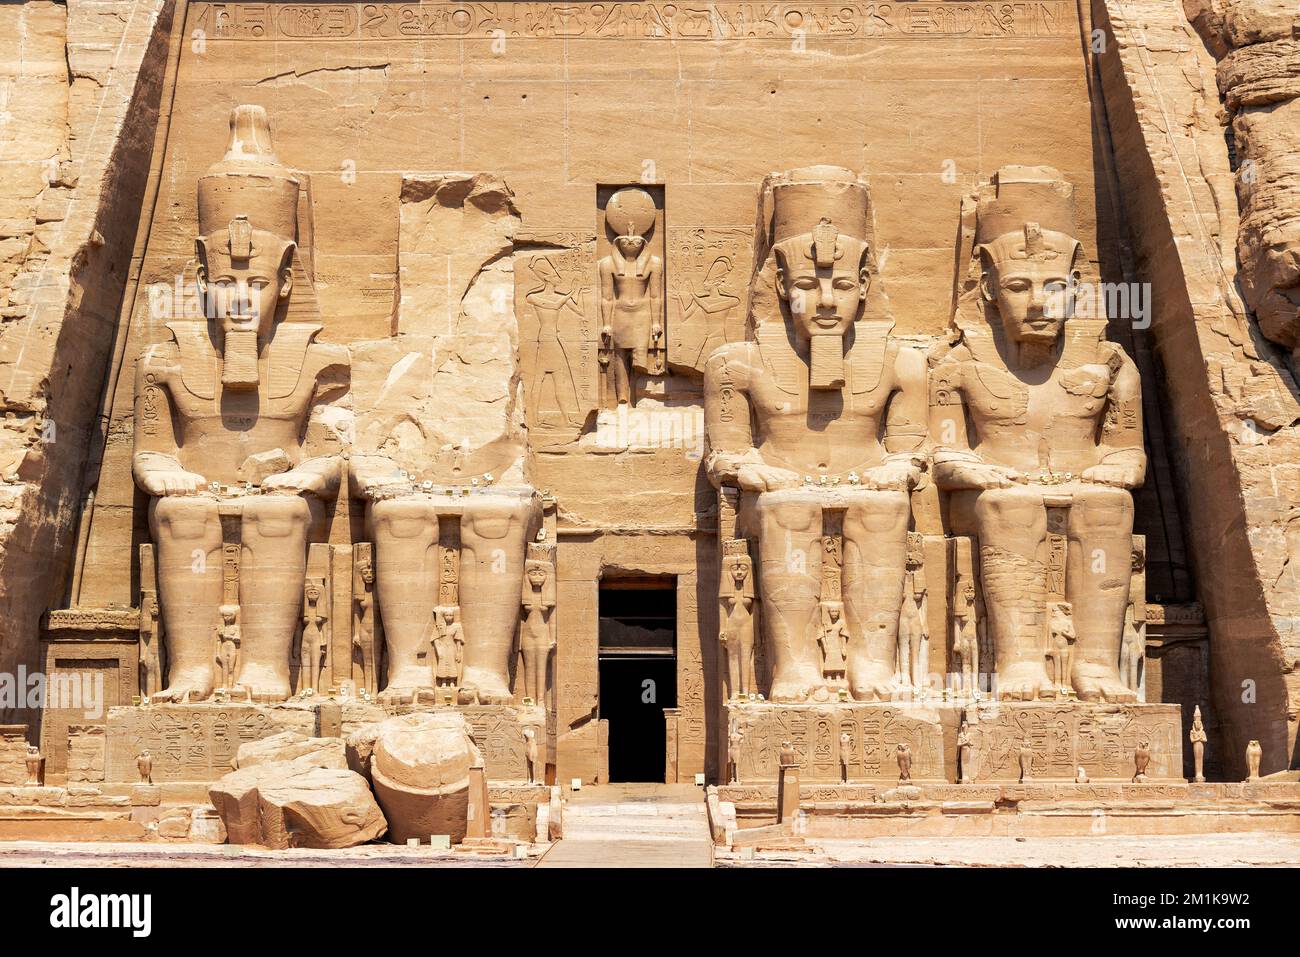 Closeup view of the statues outside the temple of Abu Simbel, Egypt Stock Photo